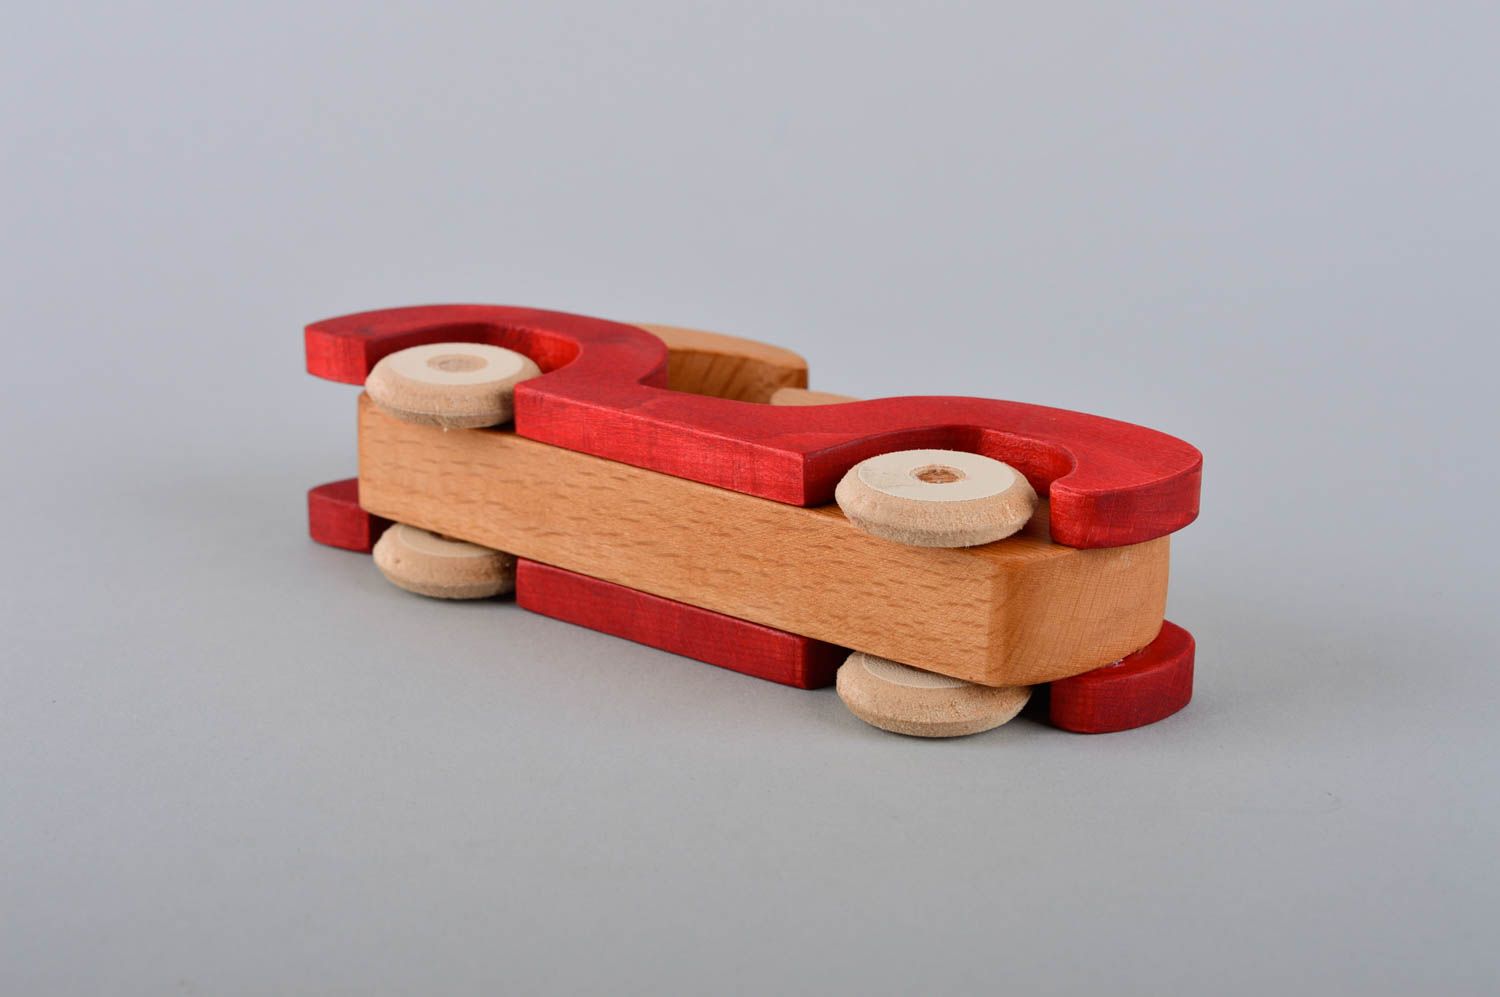 Handmade toy wooden toy for children nursery decor ideas gift for baby photo 4